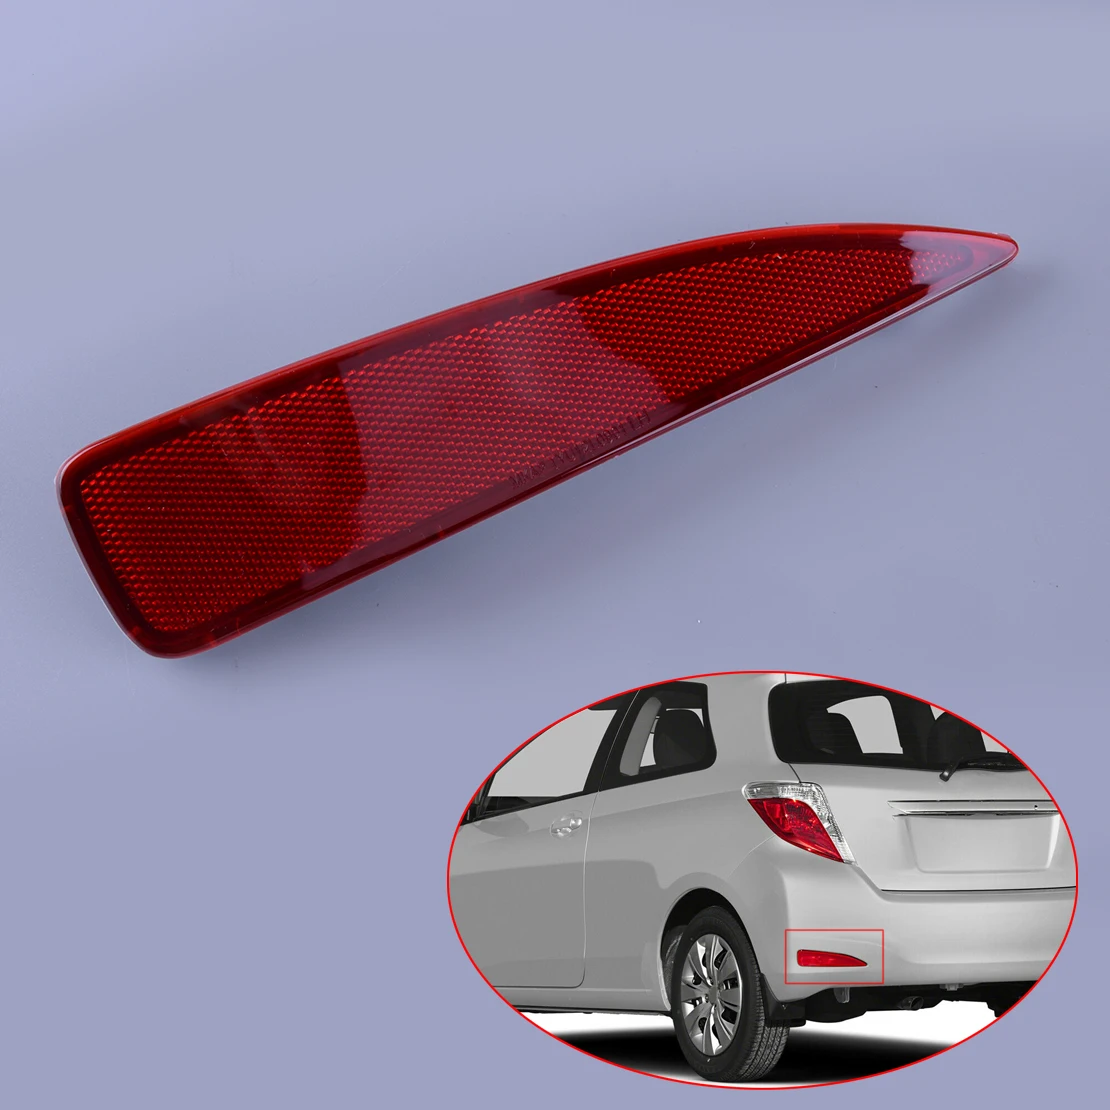 

52164-52100 TO1184103 Car Rear Bumper Left Reflector Light Lamp Housing Cover Fit For Toyota Yaris Base PREMIUM CE L LE 2012